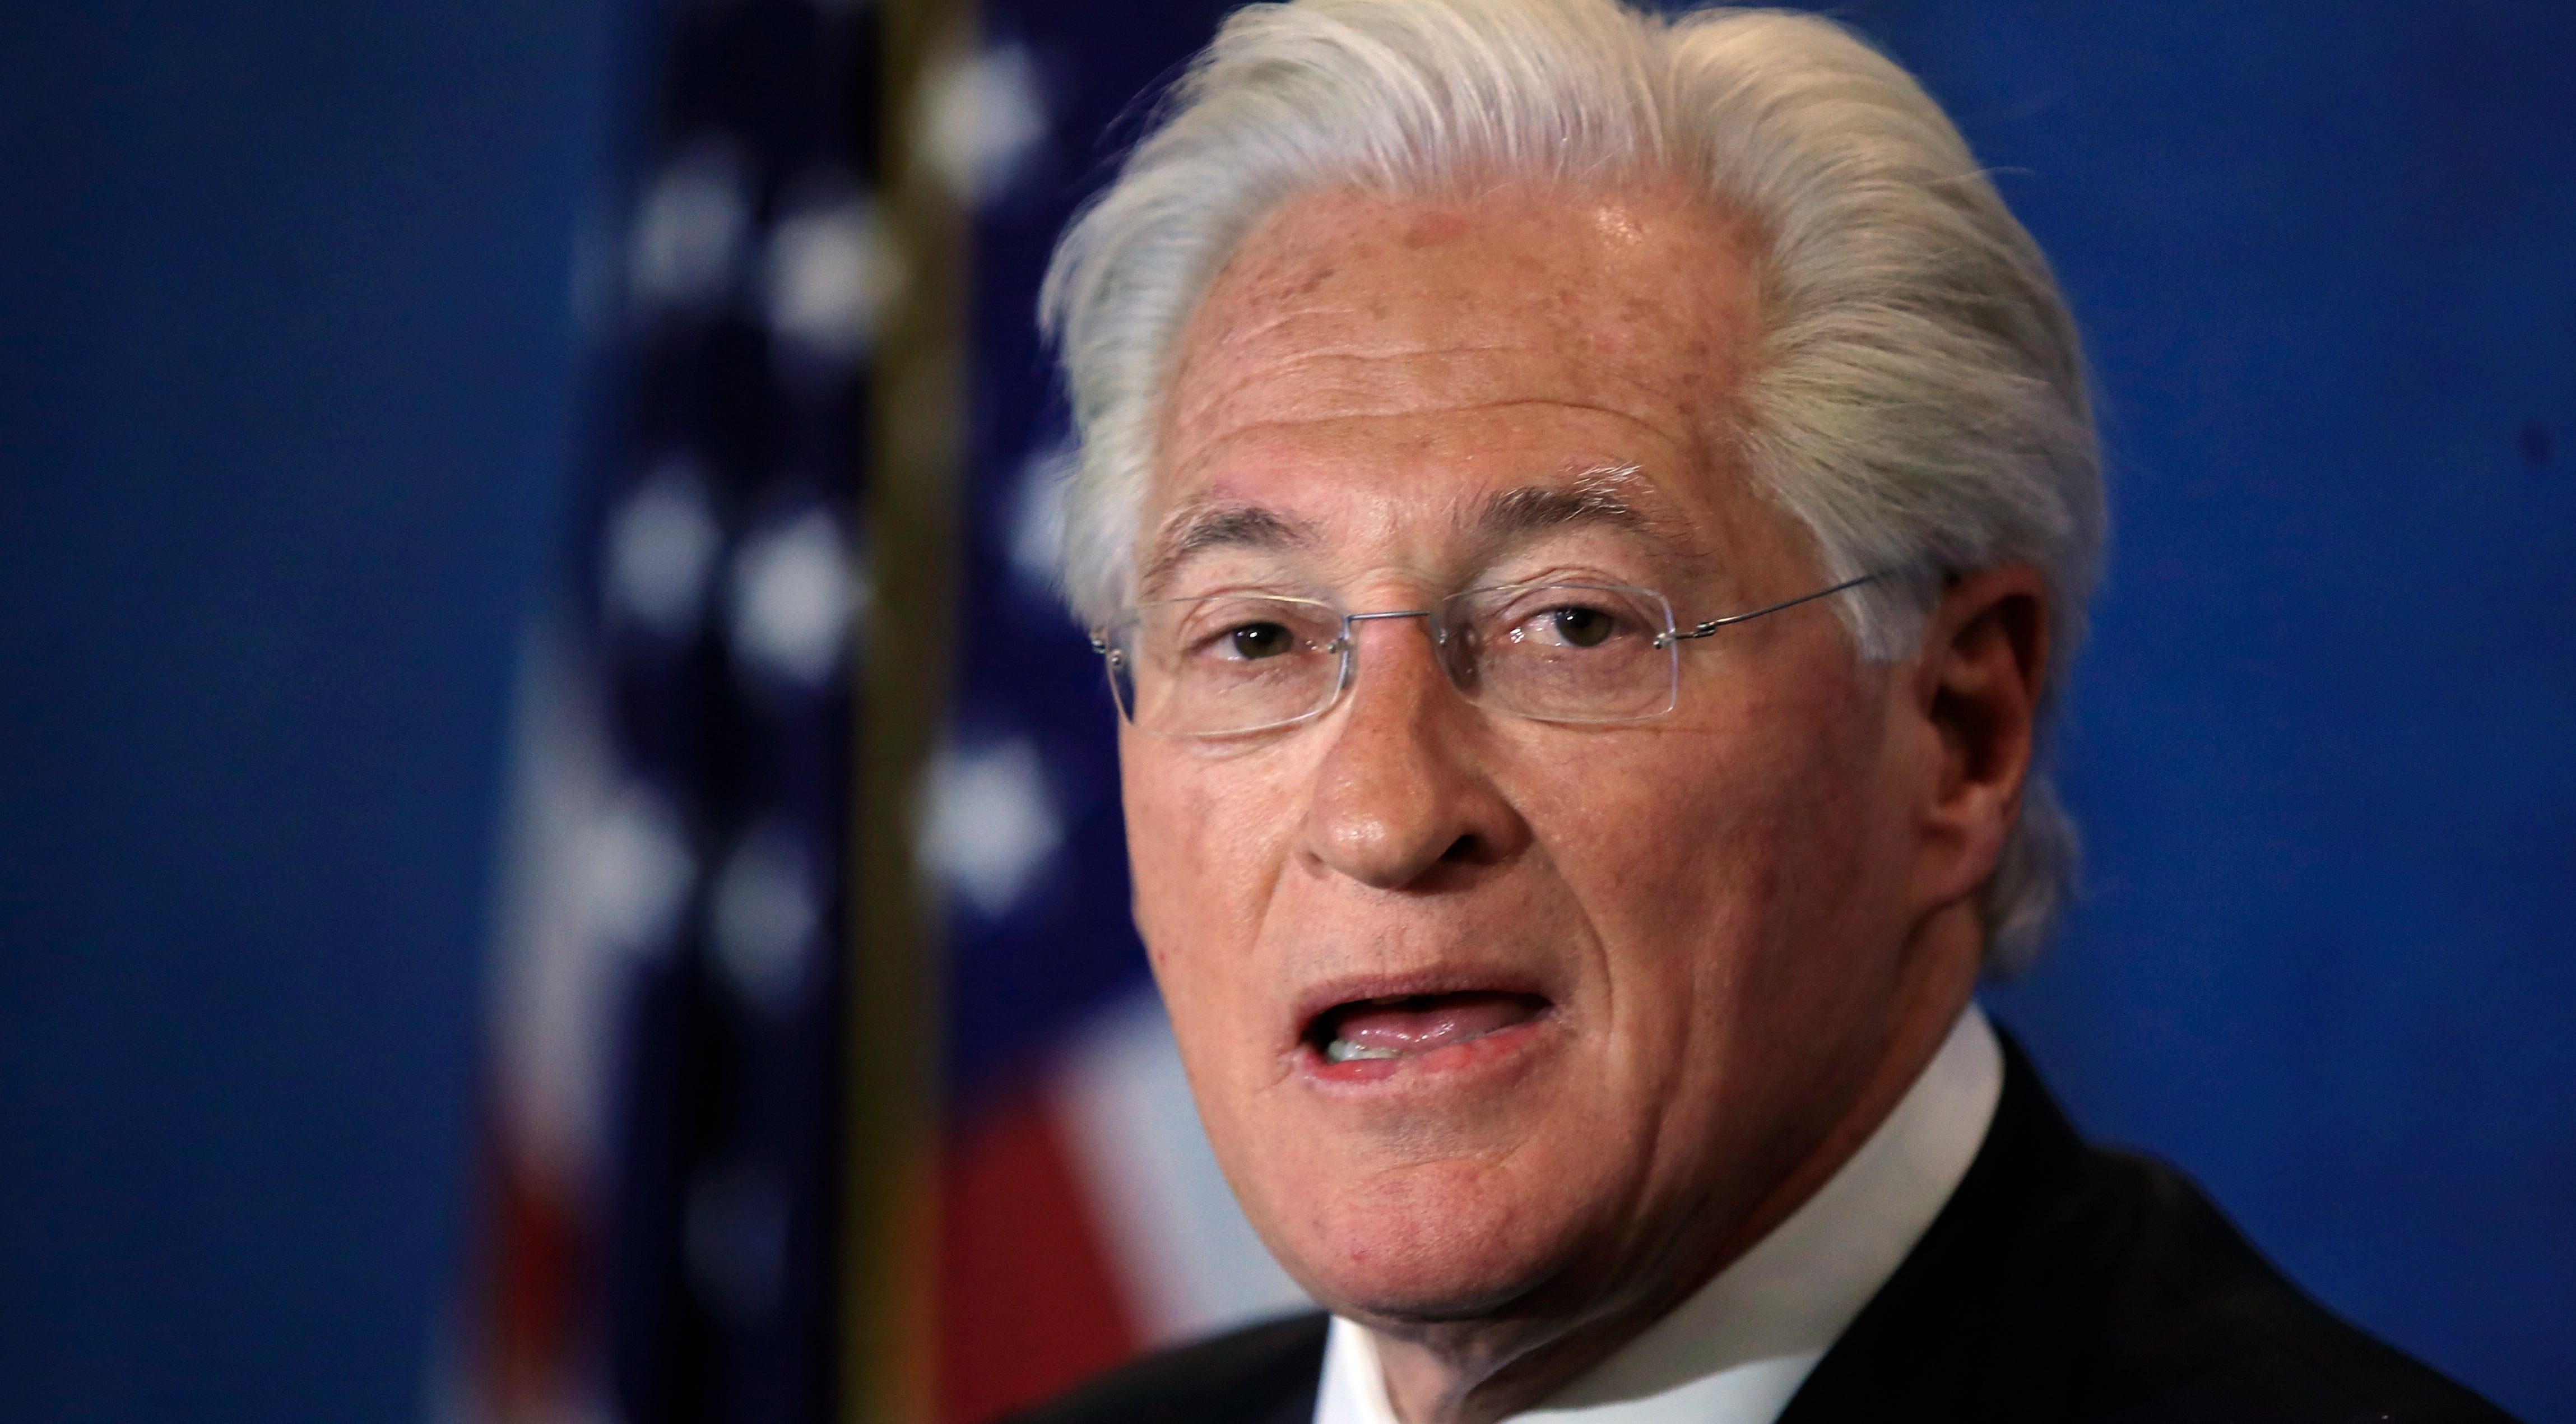  Marc Kasowitz personal attorney of President Donald Trump makes a statement at the National Press Club, following the congressional testimony of former FBI Director James Comey in Washington, Thursday, June 8, 2017. (AP Photo/Manuel Balce Ceneta)  